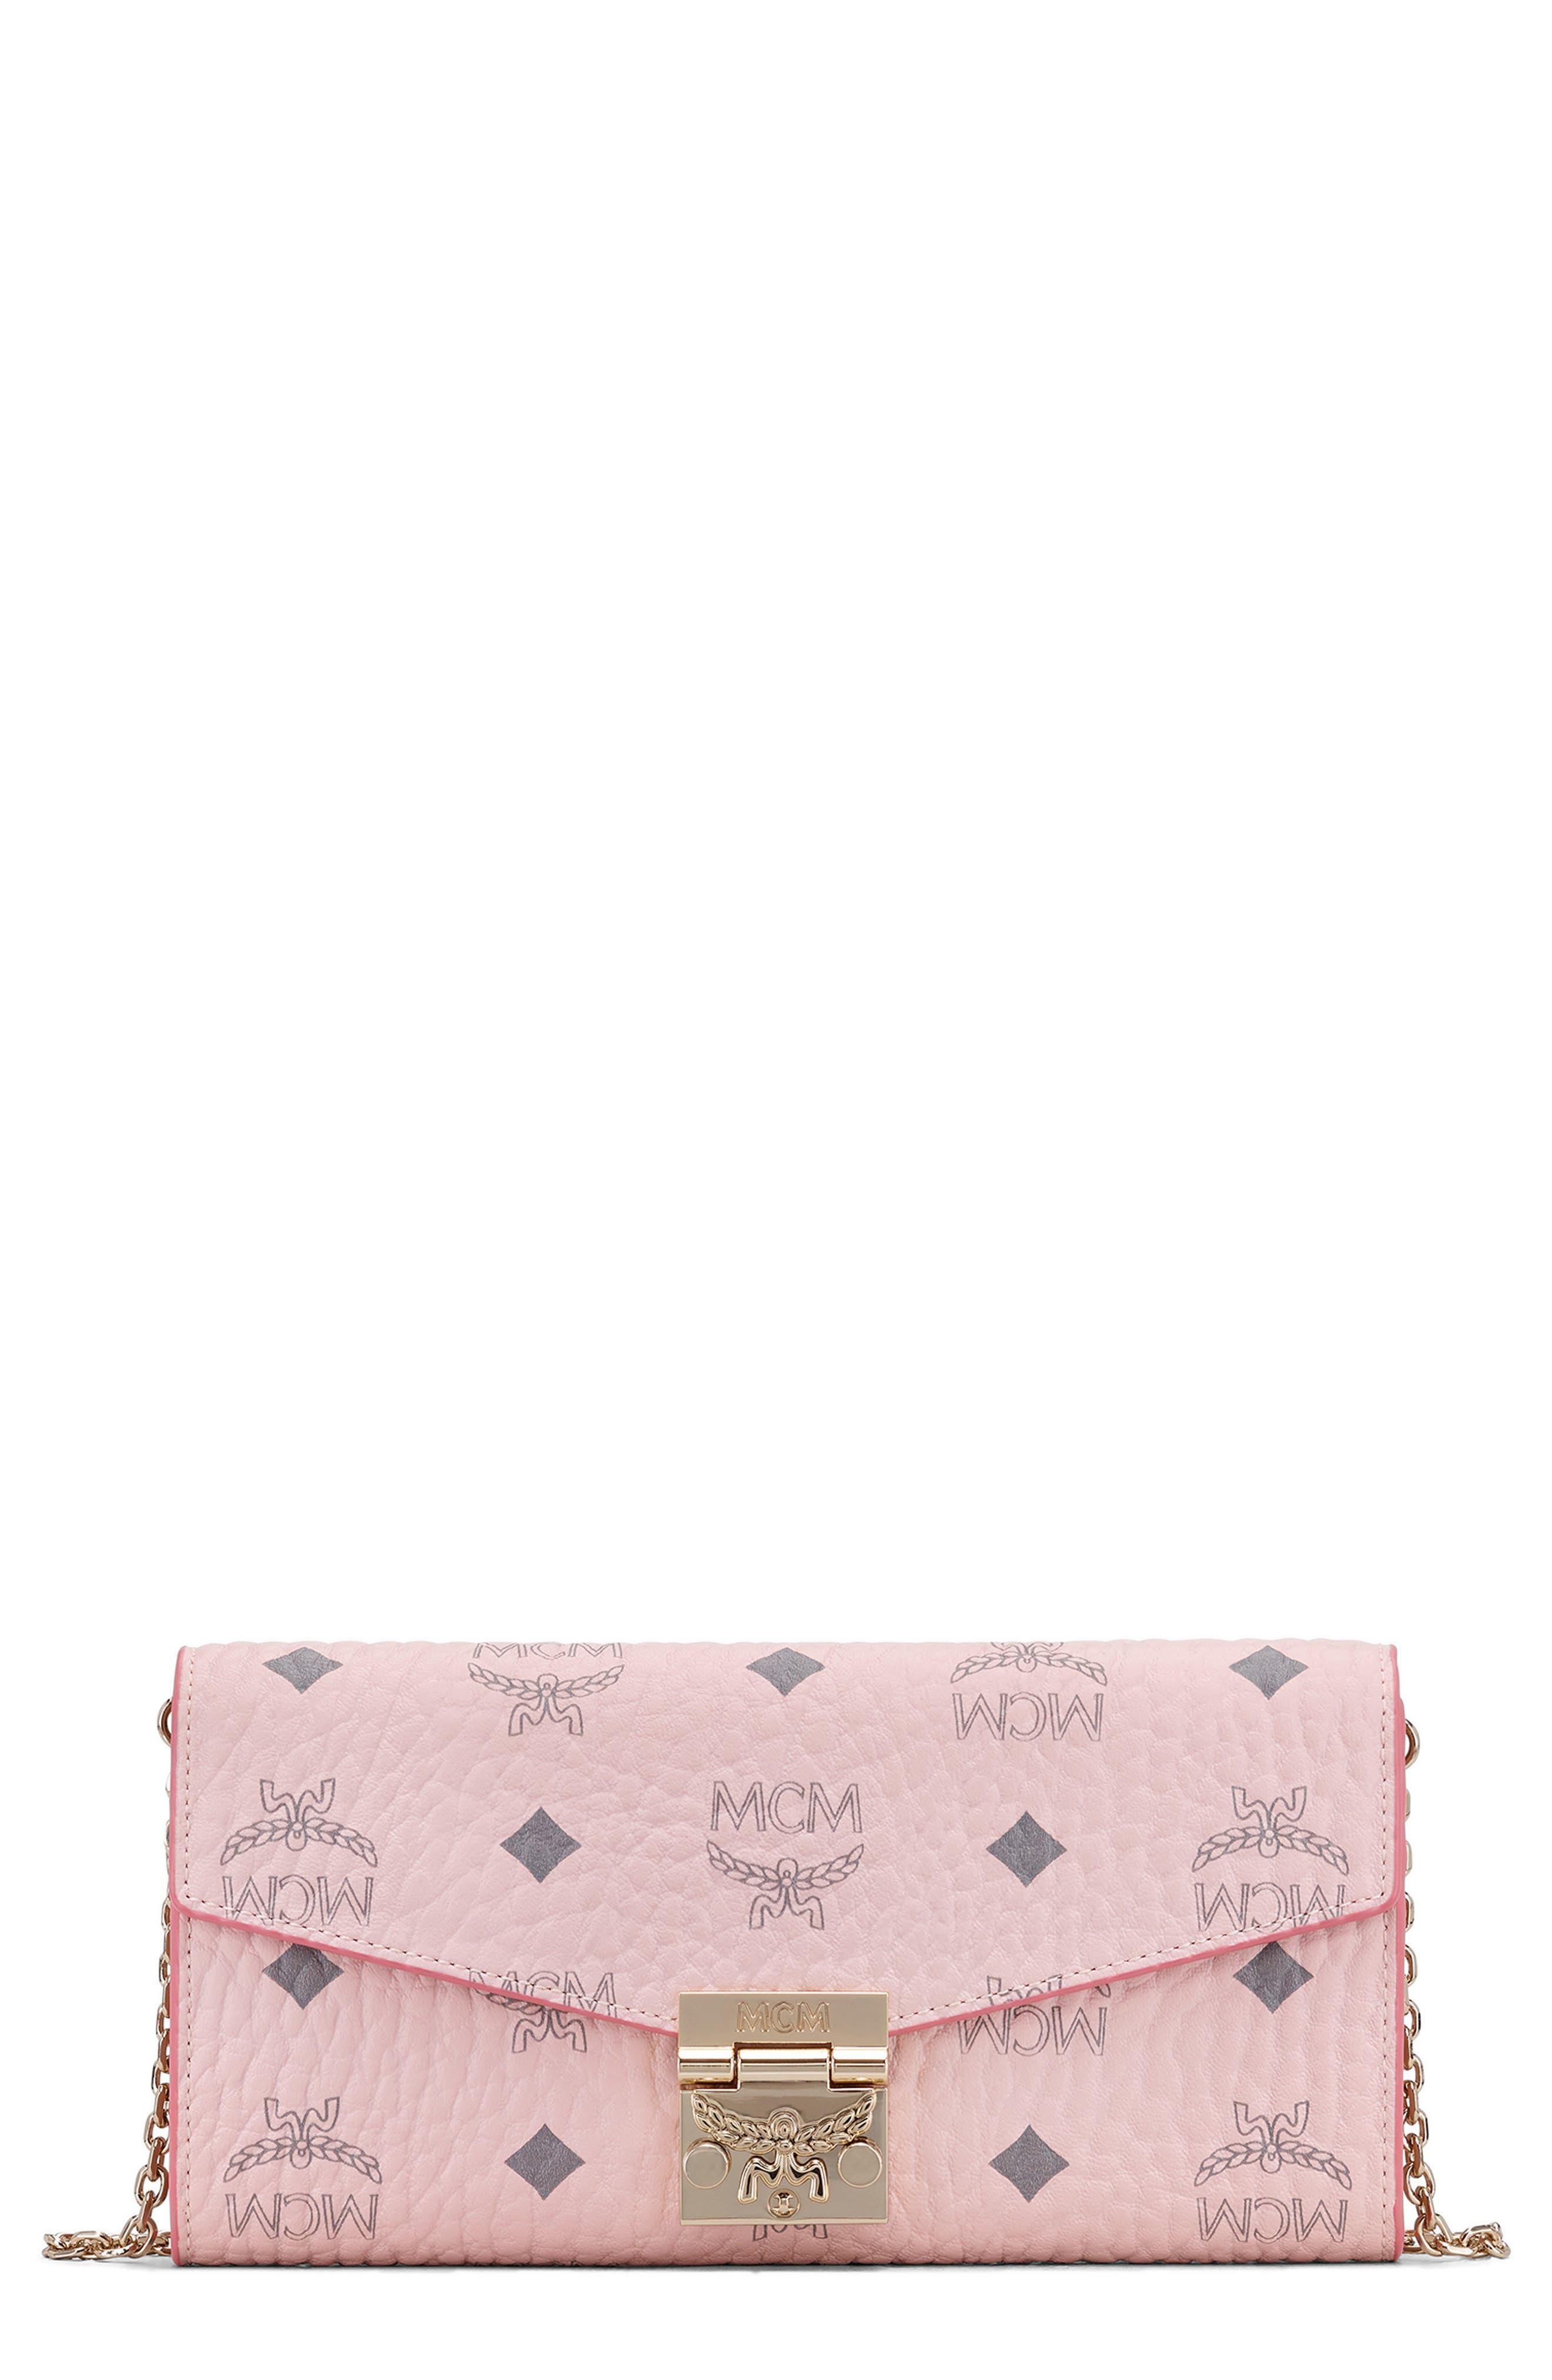 MCM Patricia Visetos Large Chain Wallet Review in Powder Pink